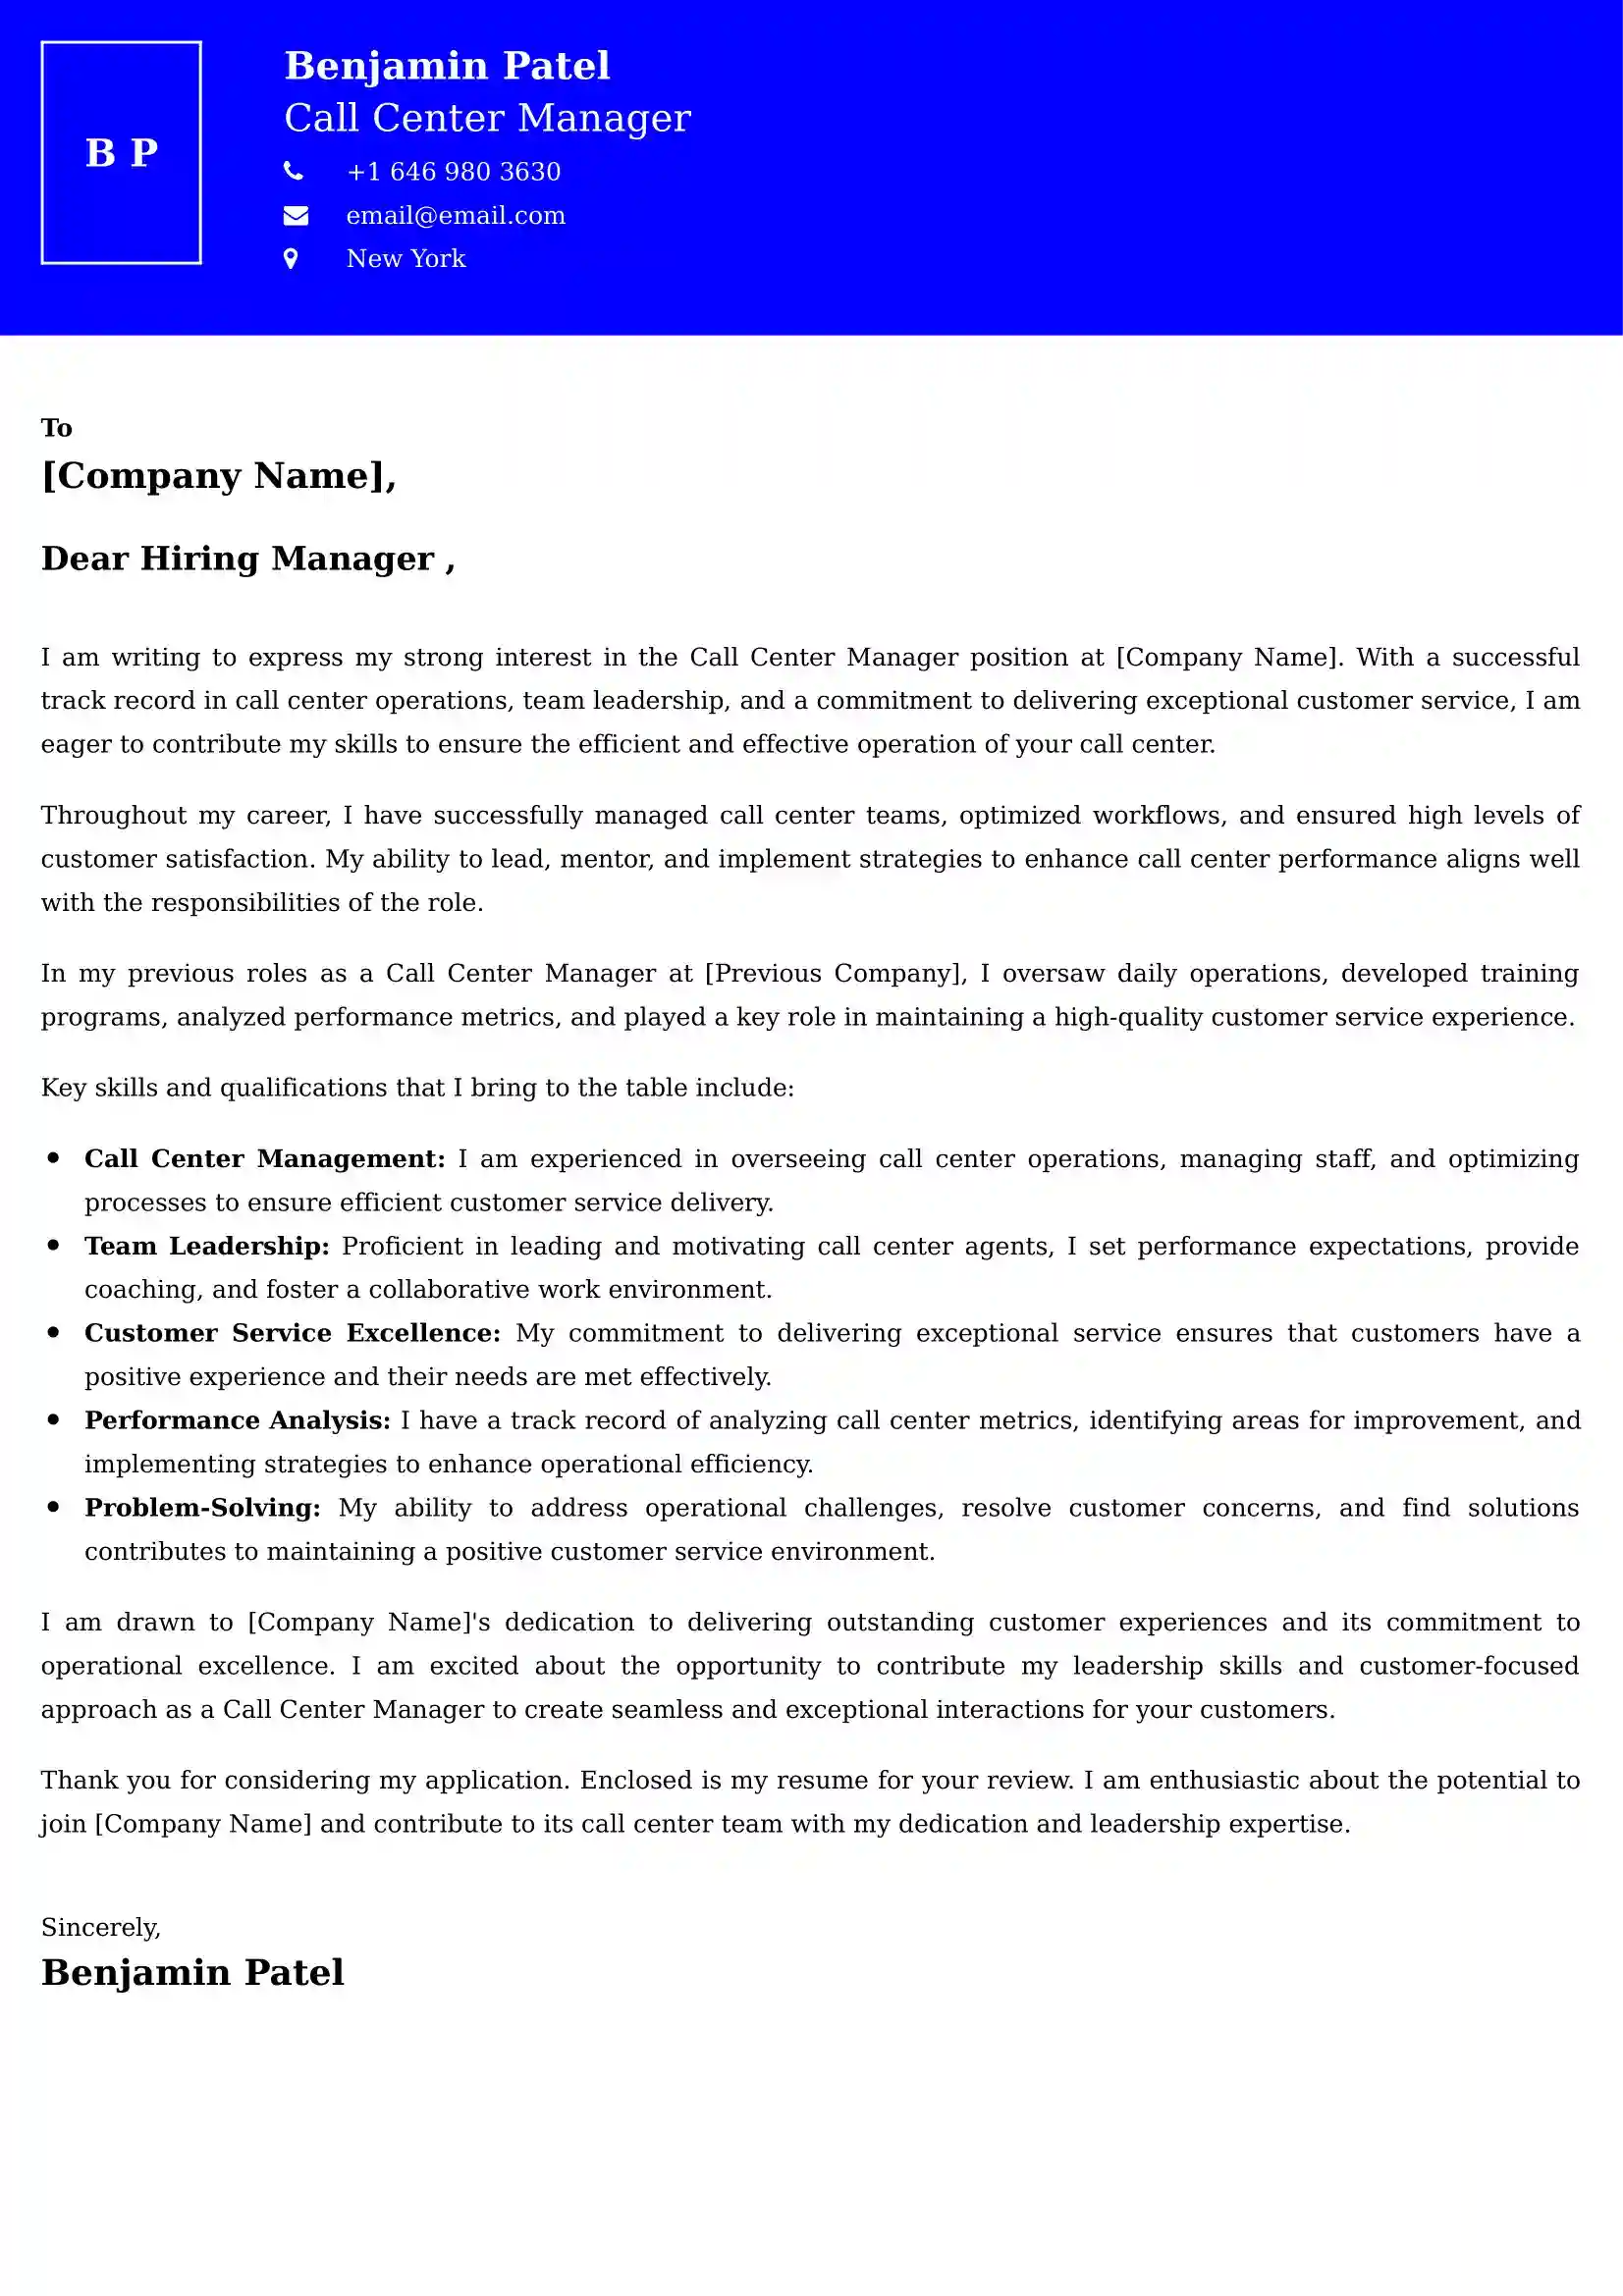 Call Center Manager Cover Letter Examples - Latest UK Format